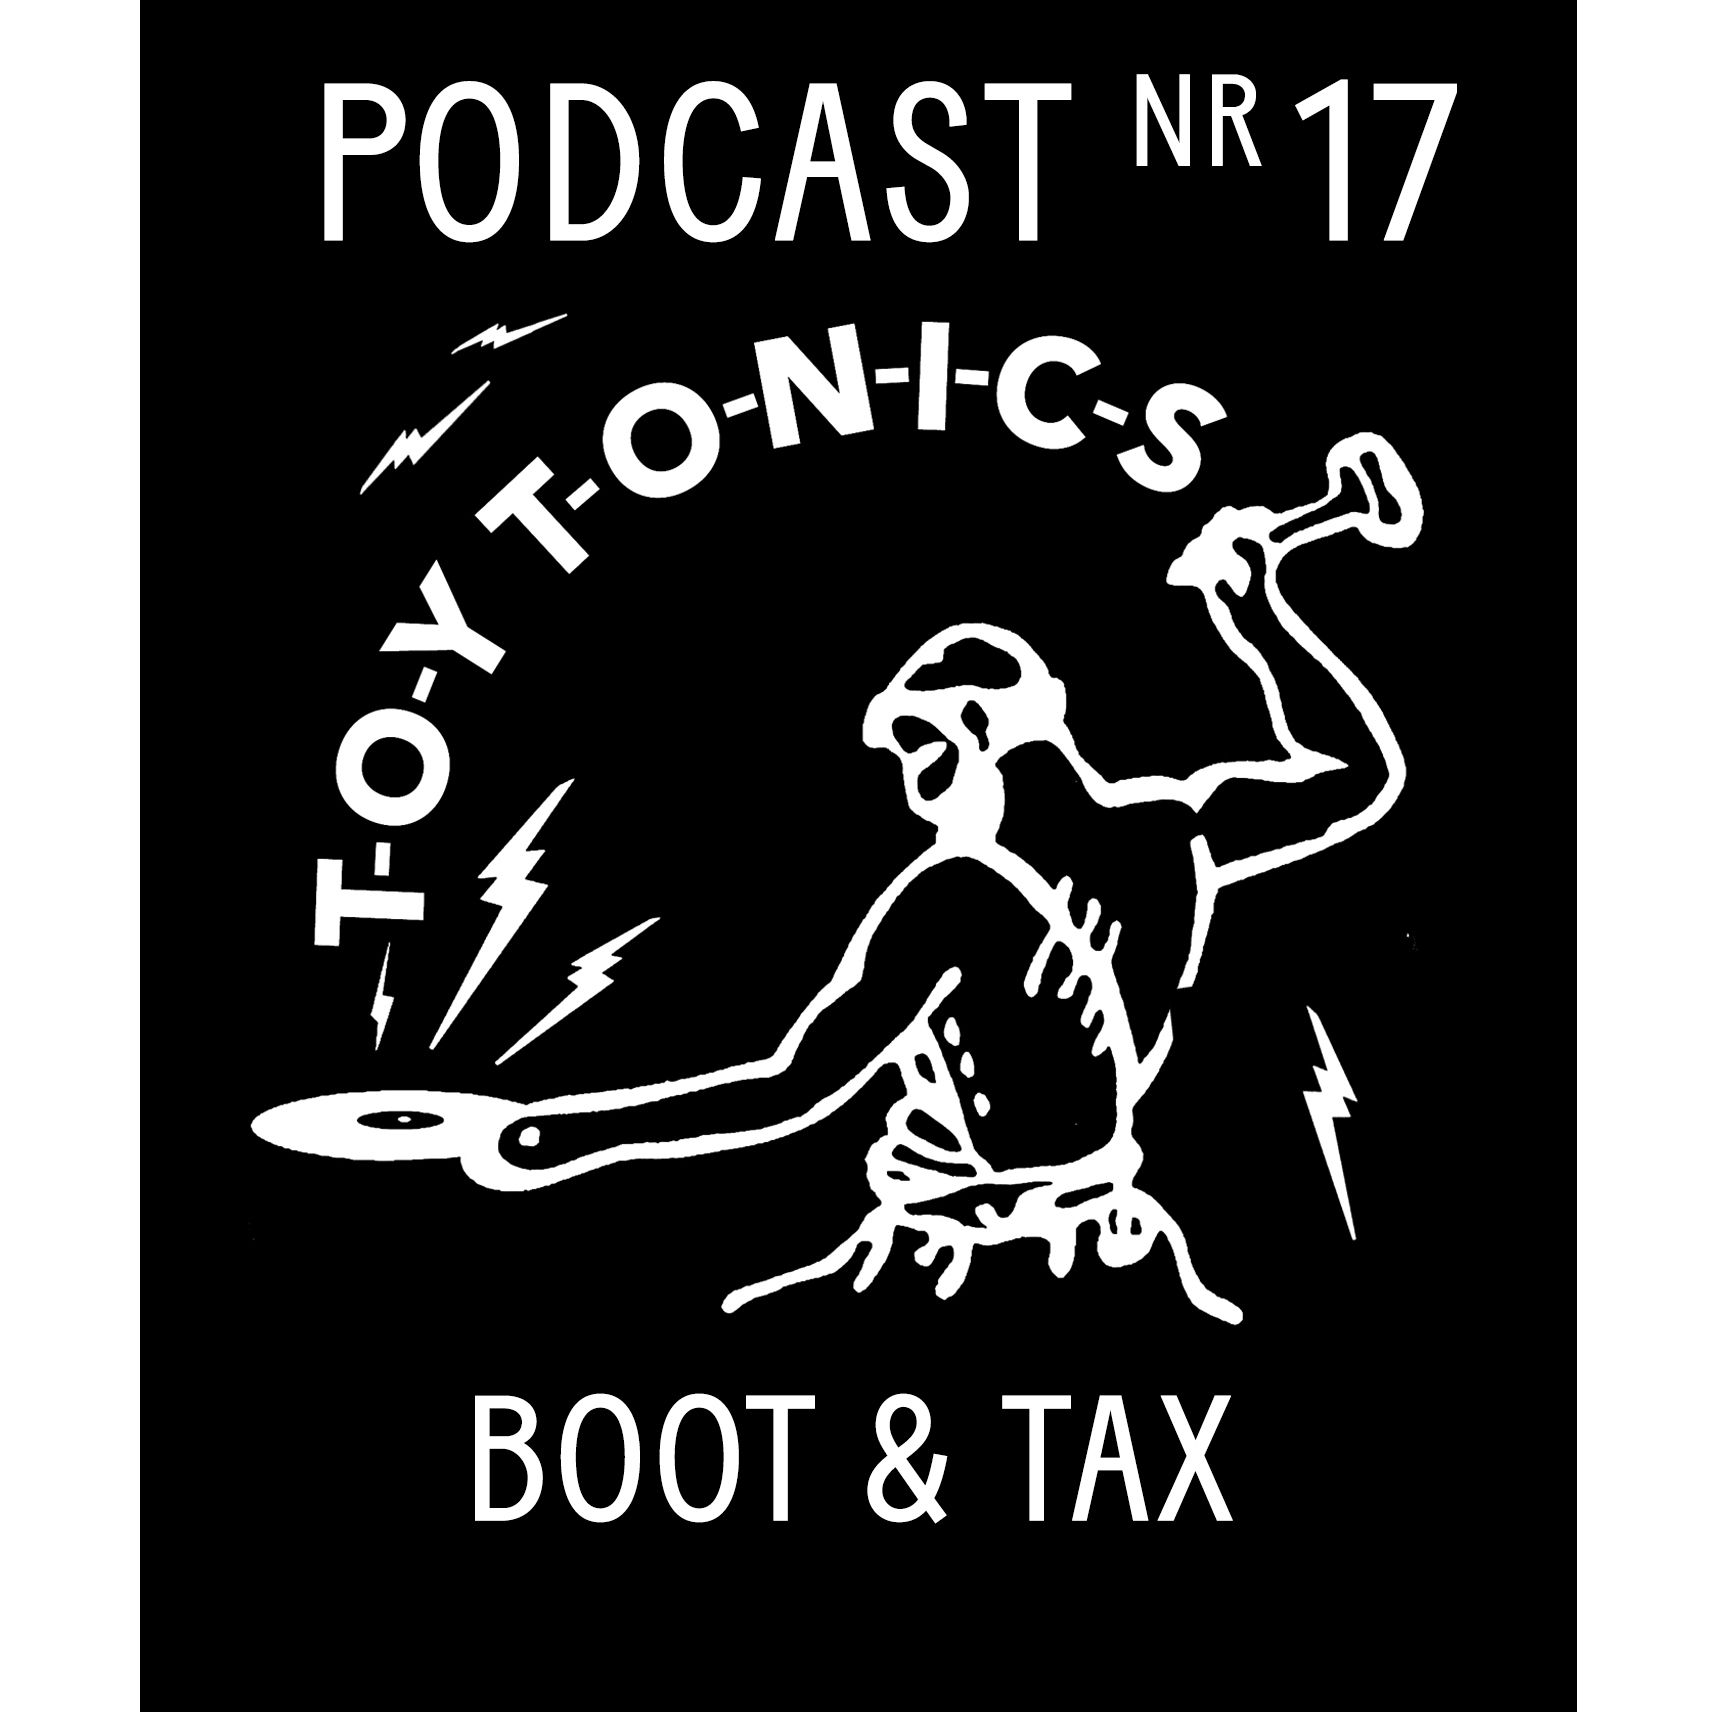 PODCAST NR 17 - Boot & Tax